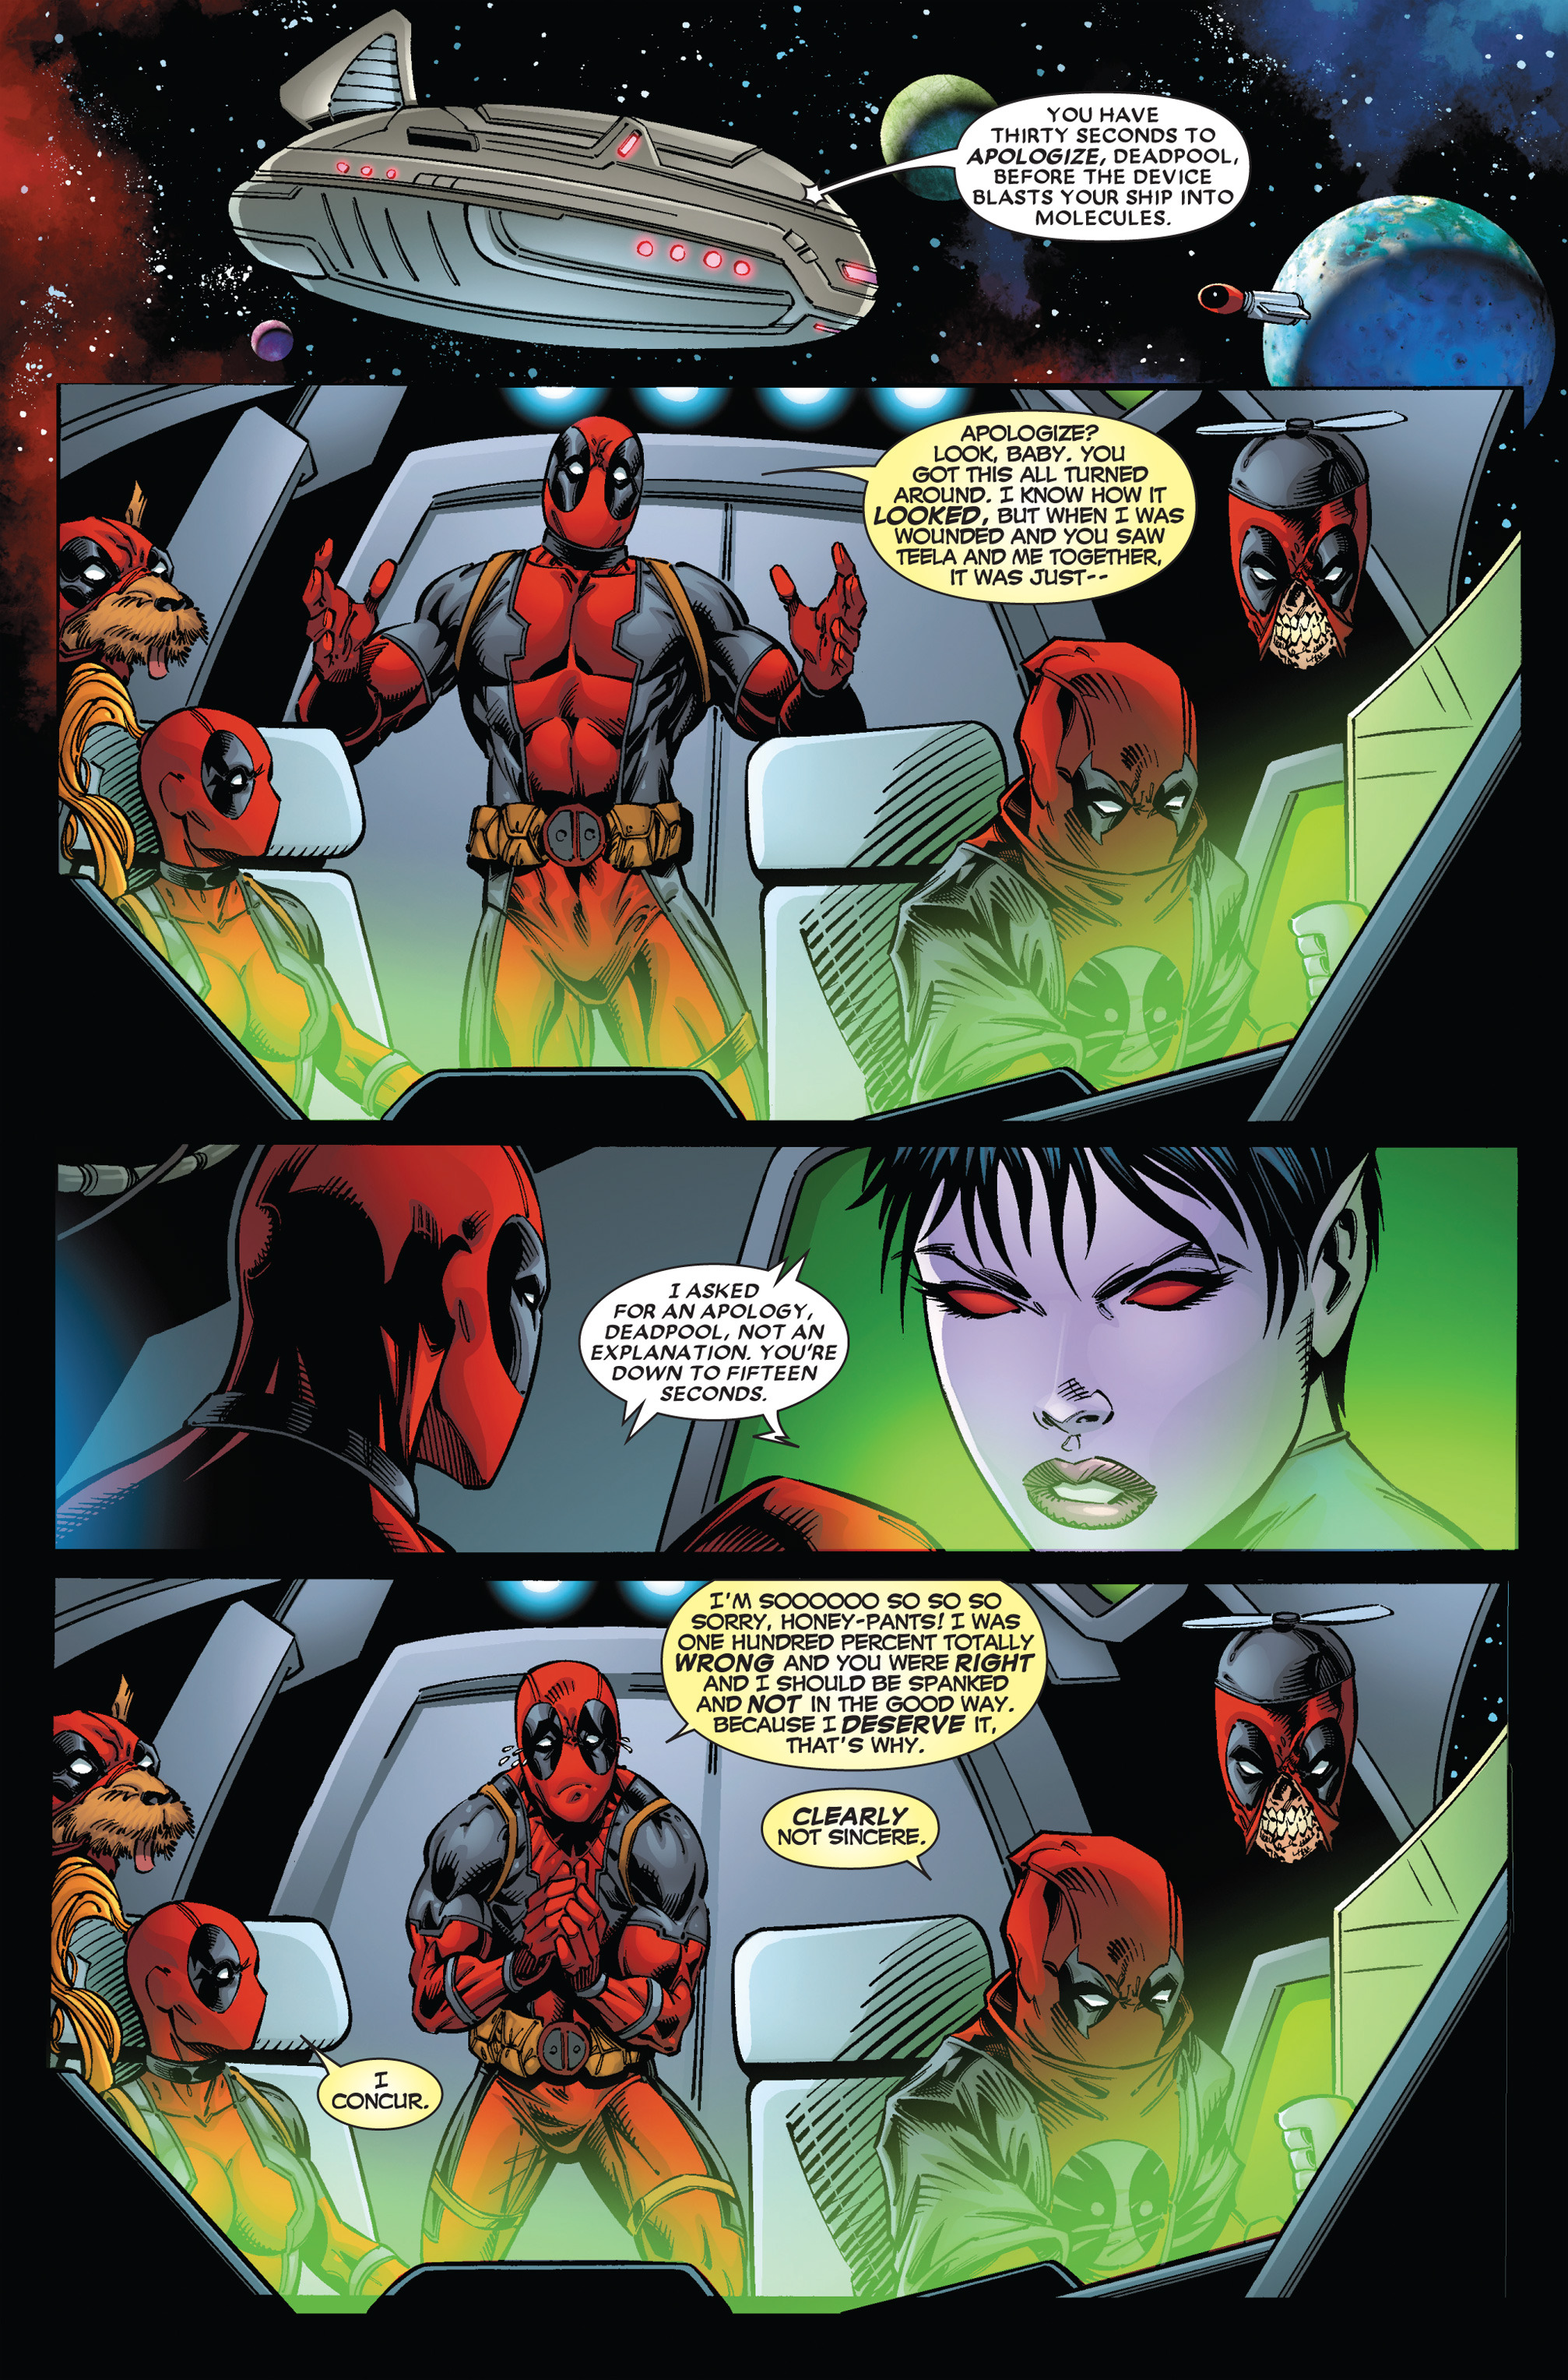 Deadpool And Godzilla Porn - Deadpool Classic Tpb 12 Part 5 | Read Deadpool Classic Tpb 12 Part 5 comic  online in high quality. Read Full Comic online for free - Read comics  online in high quality .|viewcomiconline.com